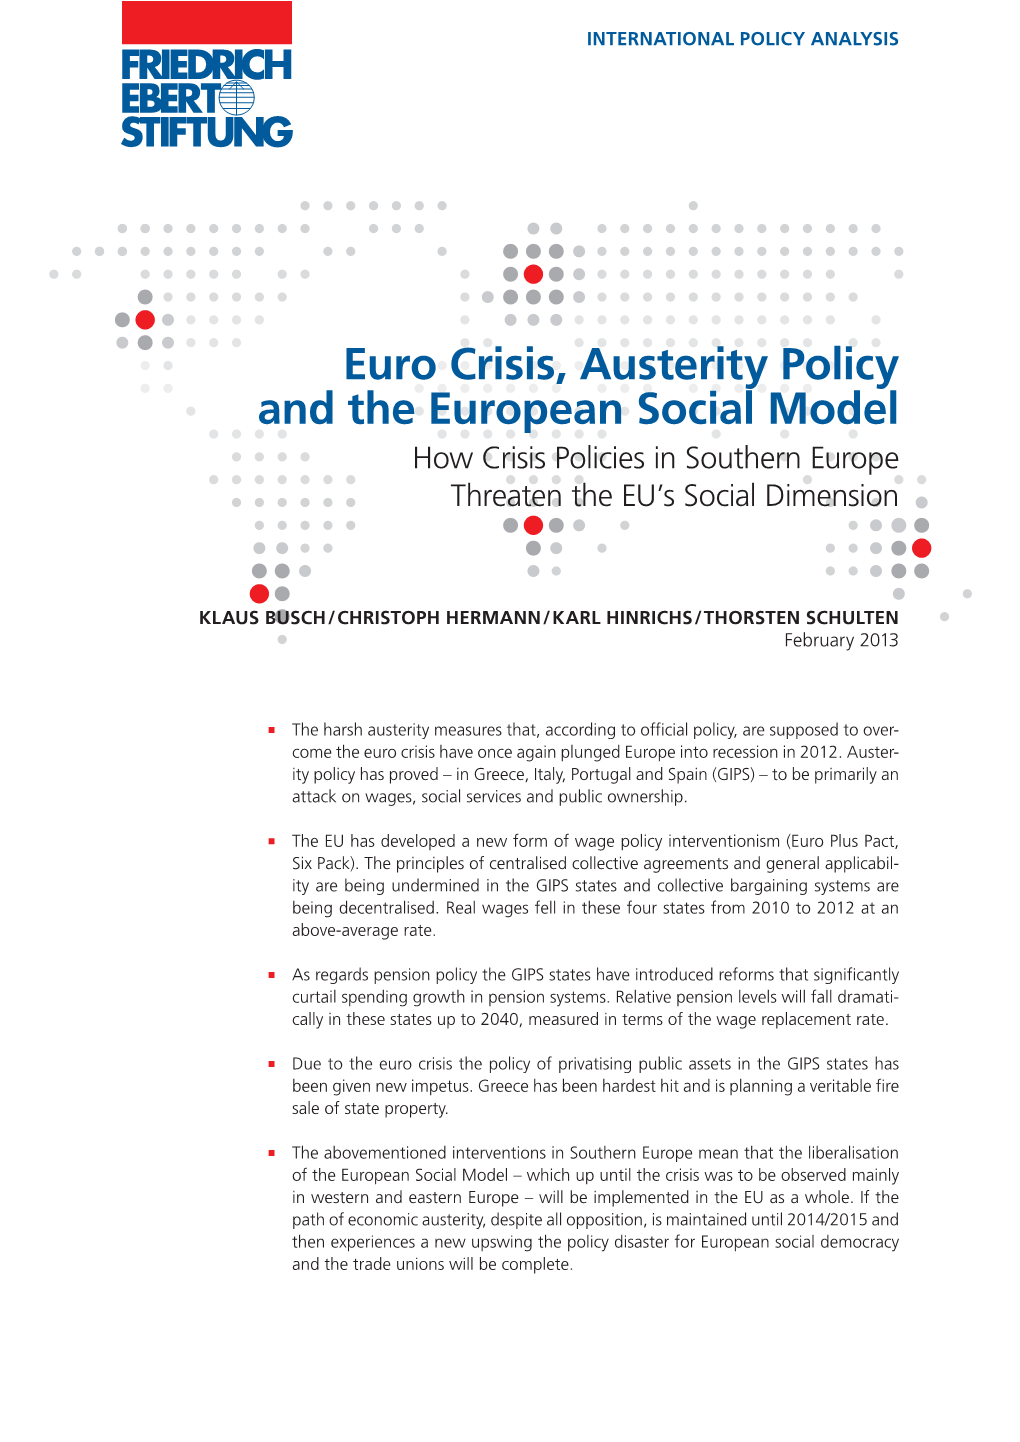 Euro Crisis, Austerity Policy and the European Social Model How Crisis Policies in Southern Europe Threaten the EU’S Social Dimension